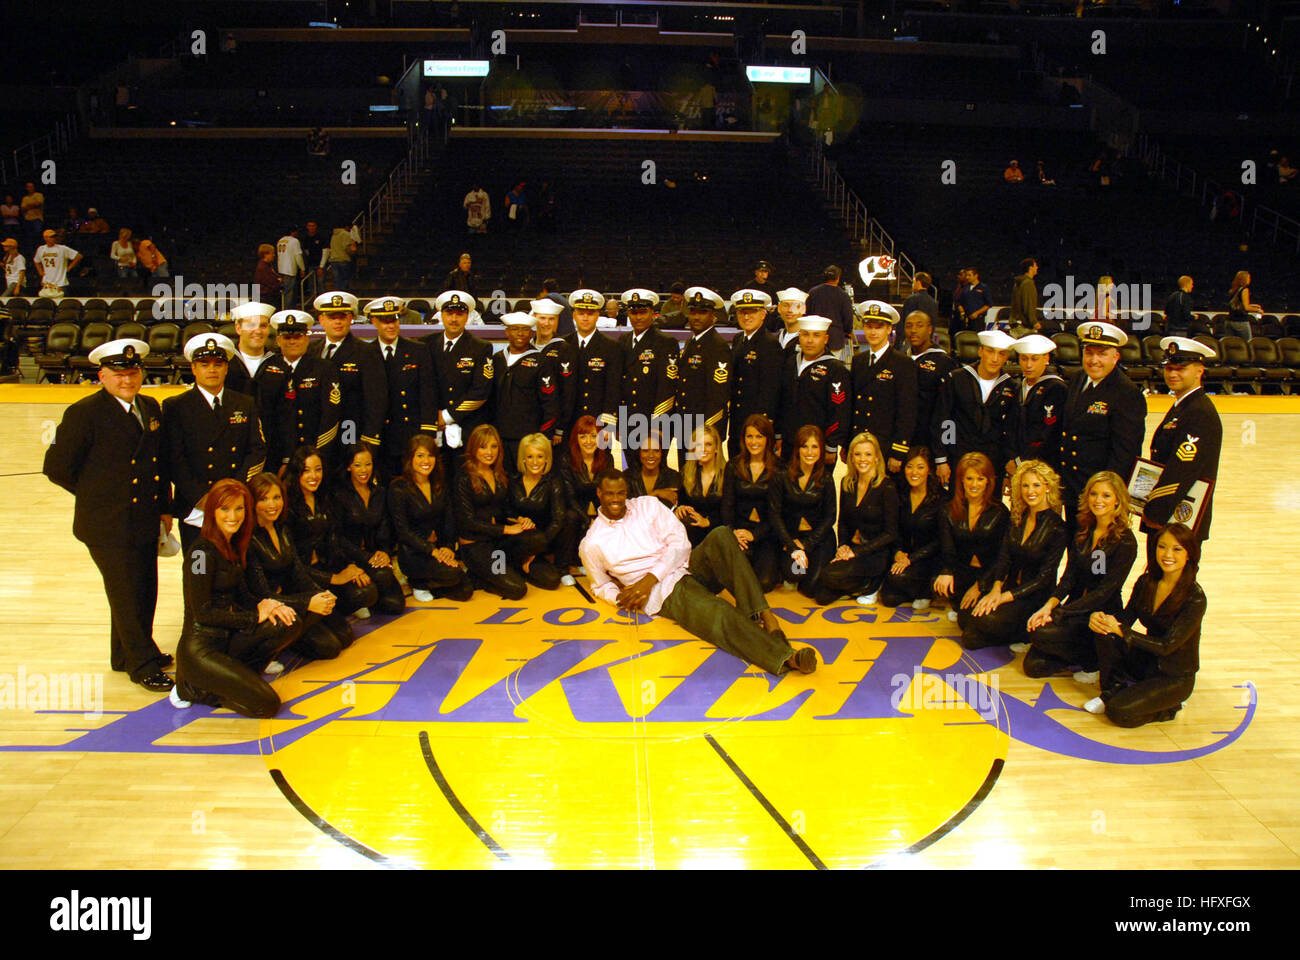 061210-N-6536T-107 Los Angeles, Calif. (Dec. 10, 2006) - Crew members from the fast attack submarine USS Los Angeles (SSN 688) pose for a photo with the Los Angeles Lakers Cheerleaders and former NBA player and Annapolis Naval Academy graduate David Robinson after the Lakers won against the San Antonio Spurs.   The Los Angeles is currently participating in a namesake city visit. This is the first port call the Los Angeles, based out of Pearl Harbor, Hawaii, has made to the city it was named after. U.S. Navy photo by Mass Communications Specialist 2nd Class Elizabeth Thompson (RELEASED) US Navy Stock Photo